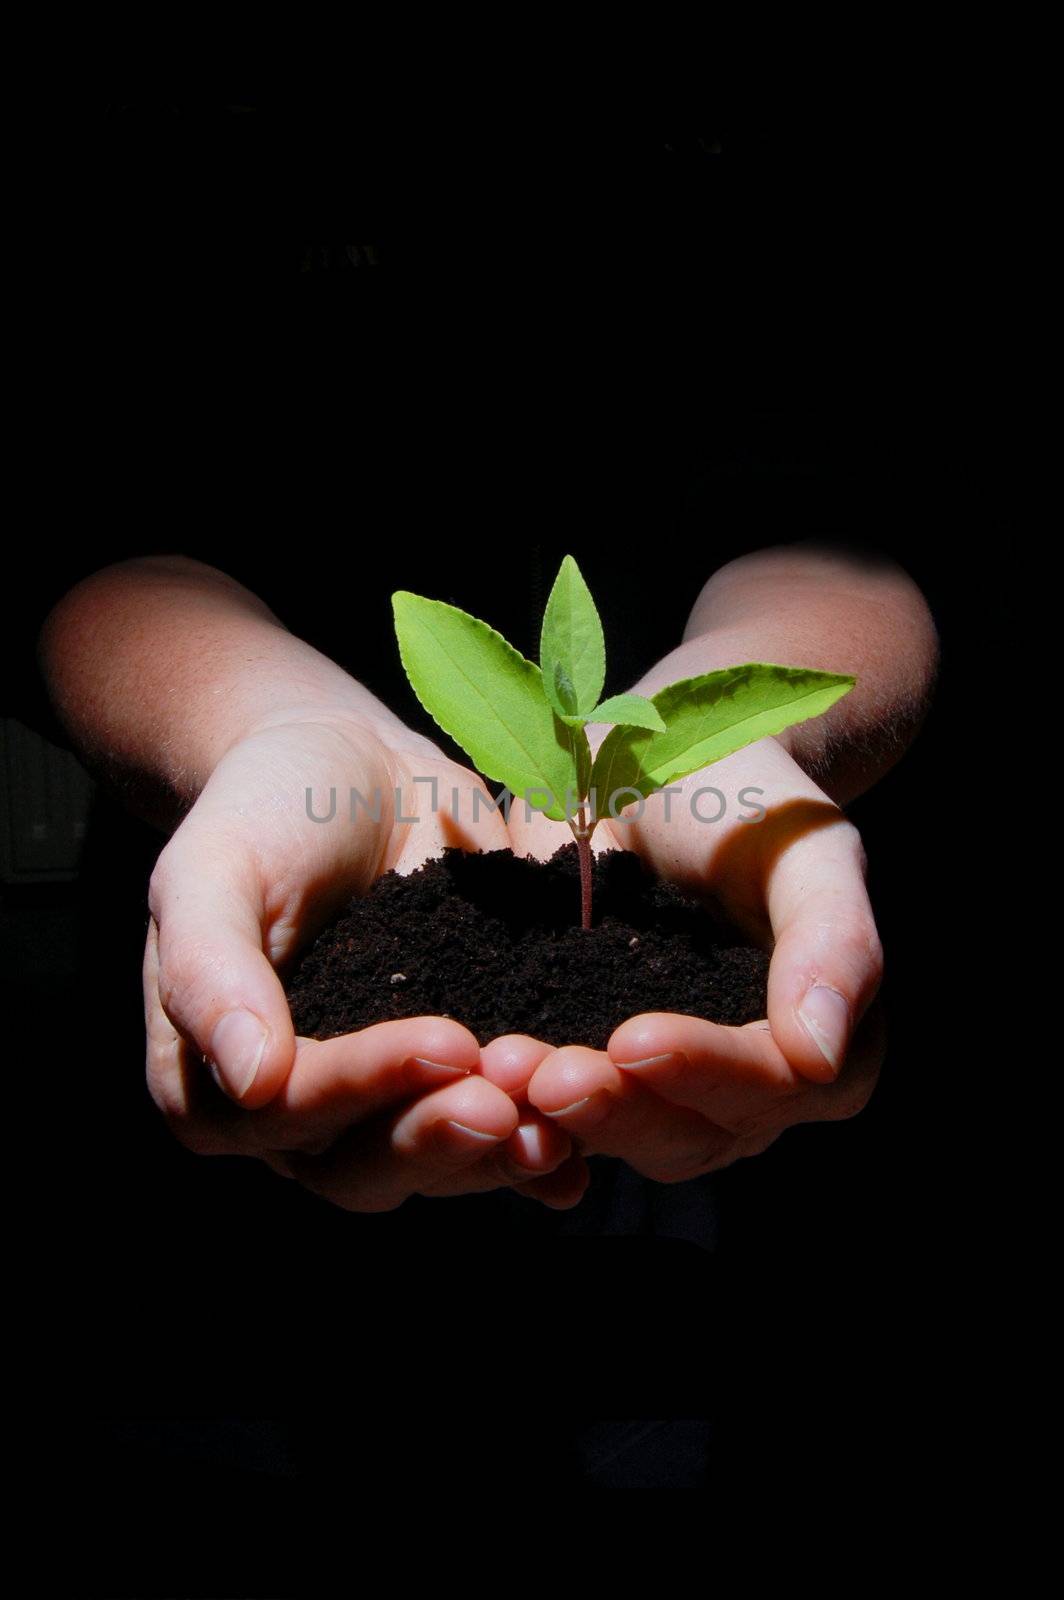 young plant in hand showing concept of youth and growth